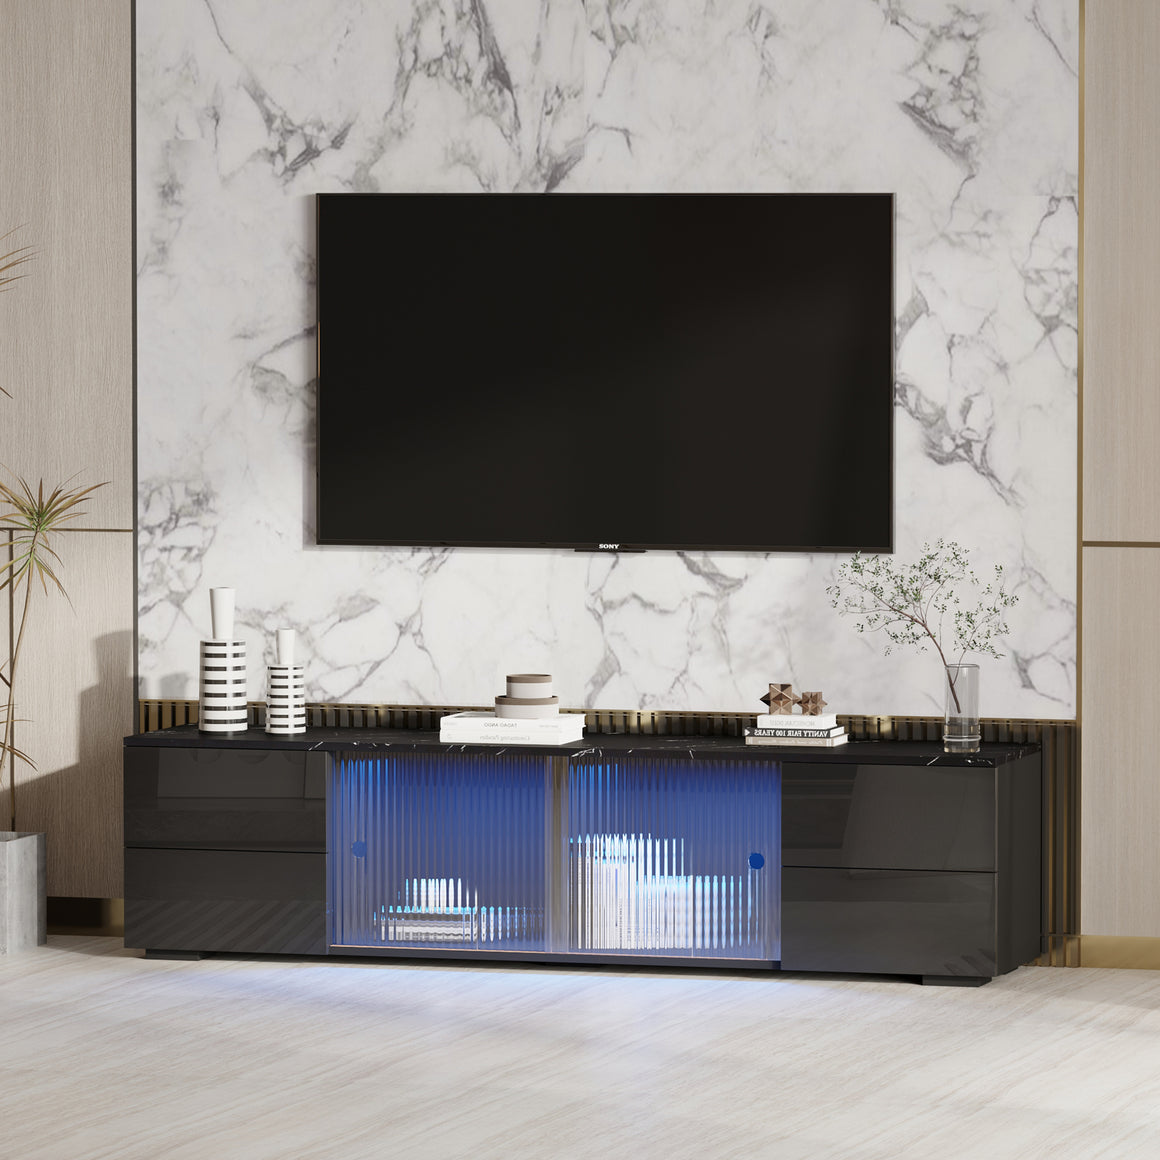 uhomepro TV Stand for Living Room up to 65" Television, Entertainment Center with LED Lights and Storage Shelves Furniture, High Gloss TV Cabinet Console Table with Marble Texture Desktop, Black